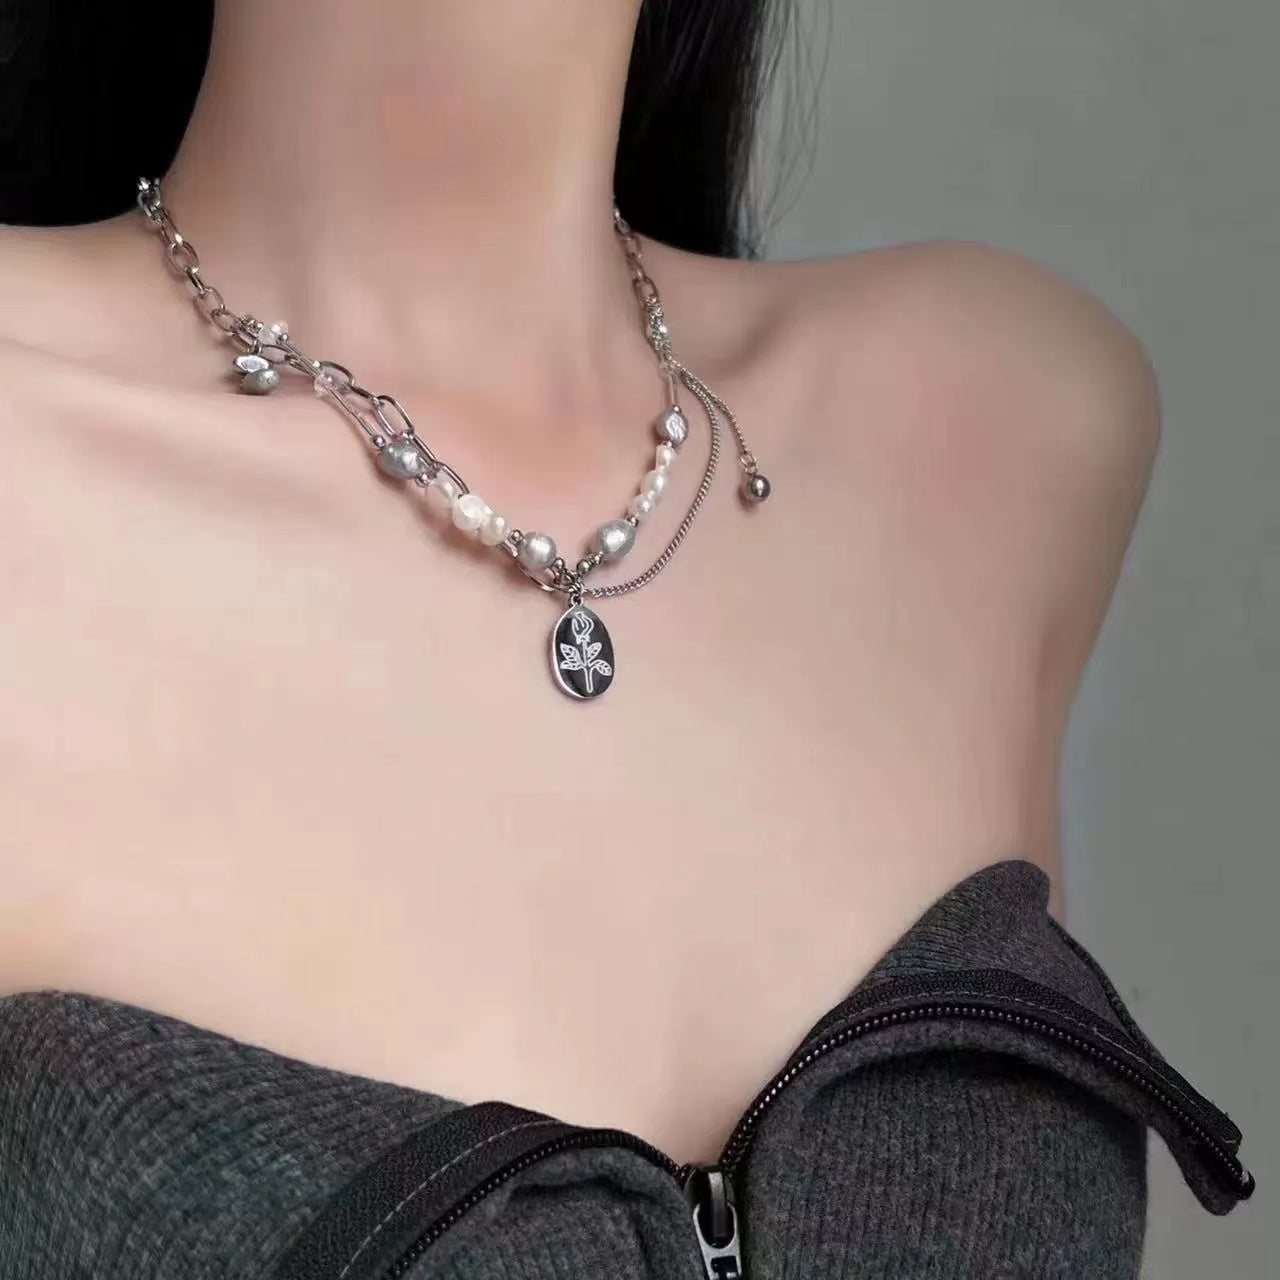 Fake double-layer necklace with shaped pearls and a high sense of sophistication